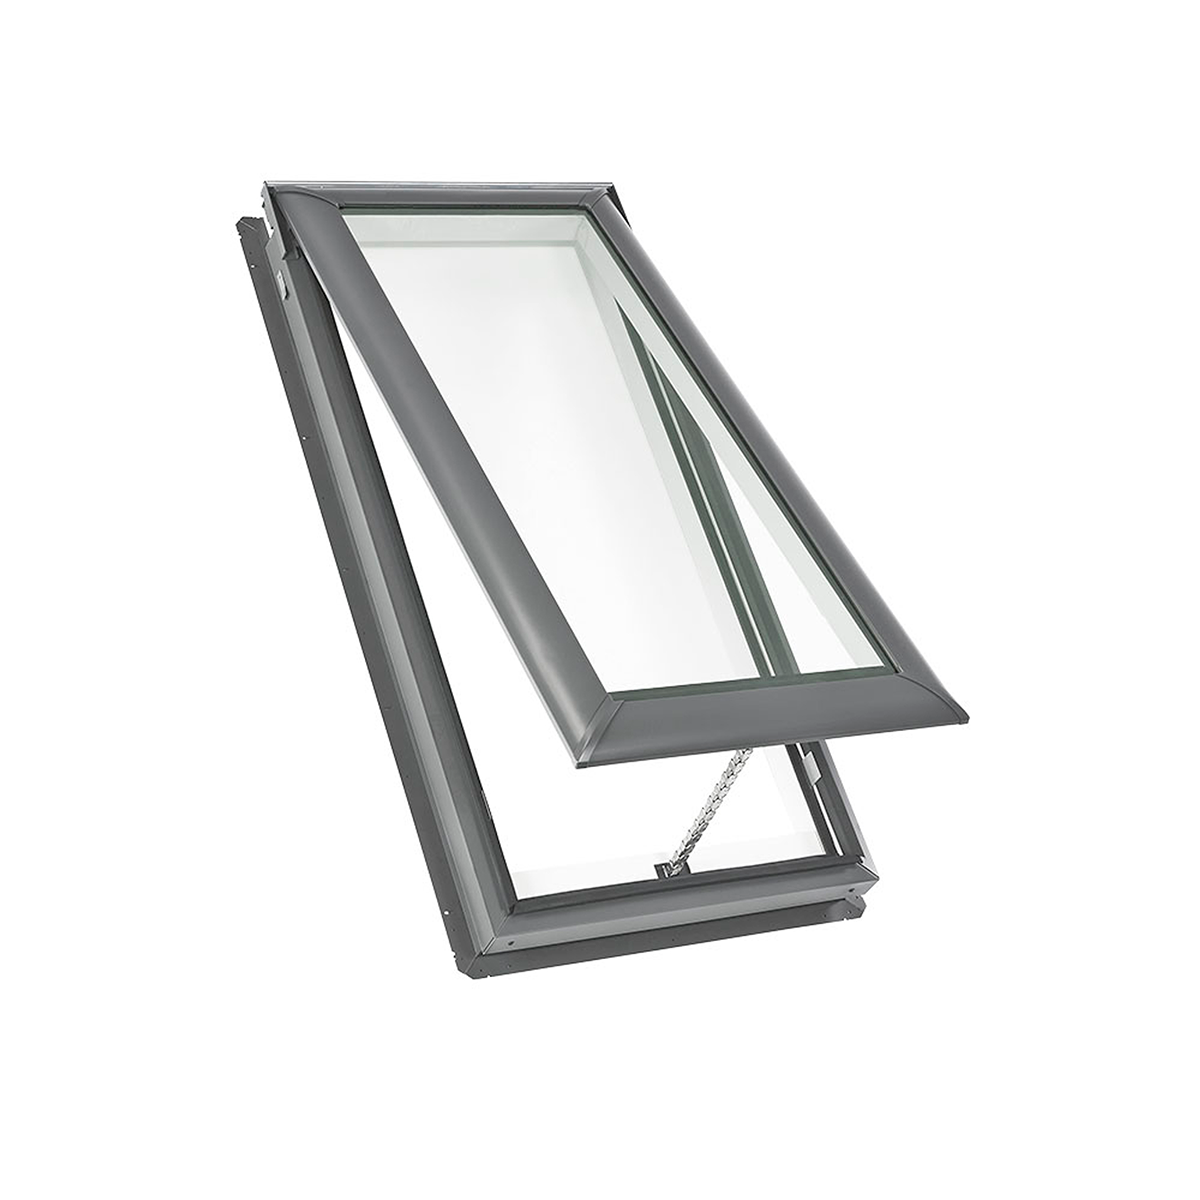 Manual Deck-Mount Skylight with Laminated Low-E3 Glass - 30-1/16 in. x 54-7/16 in. - VS M08